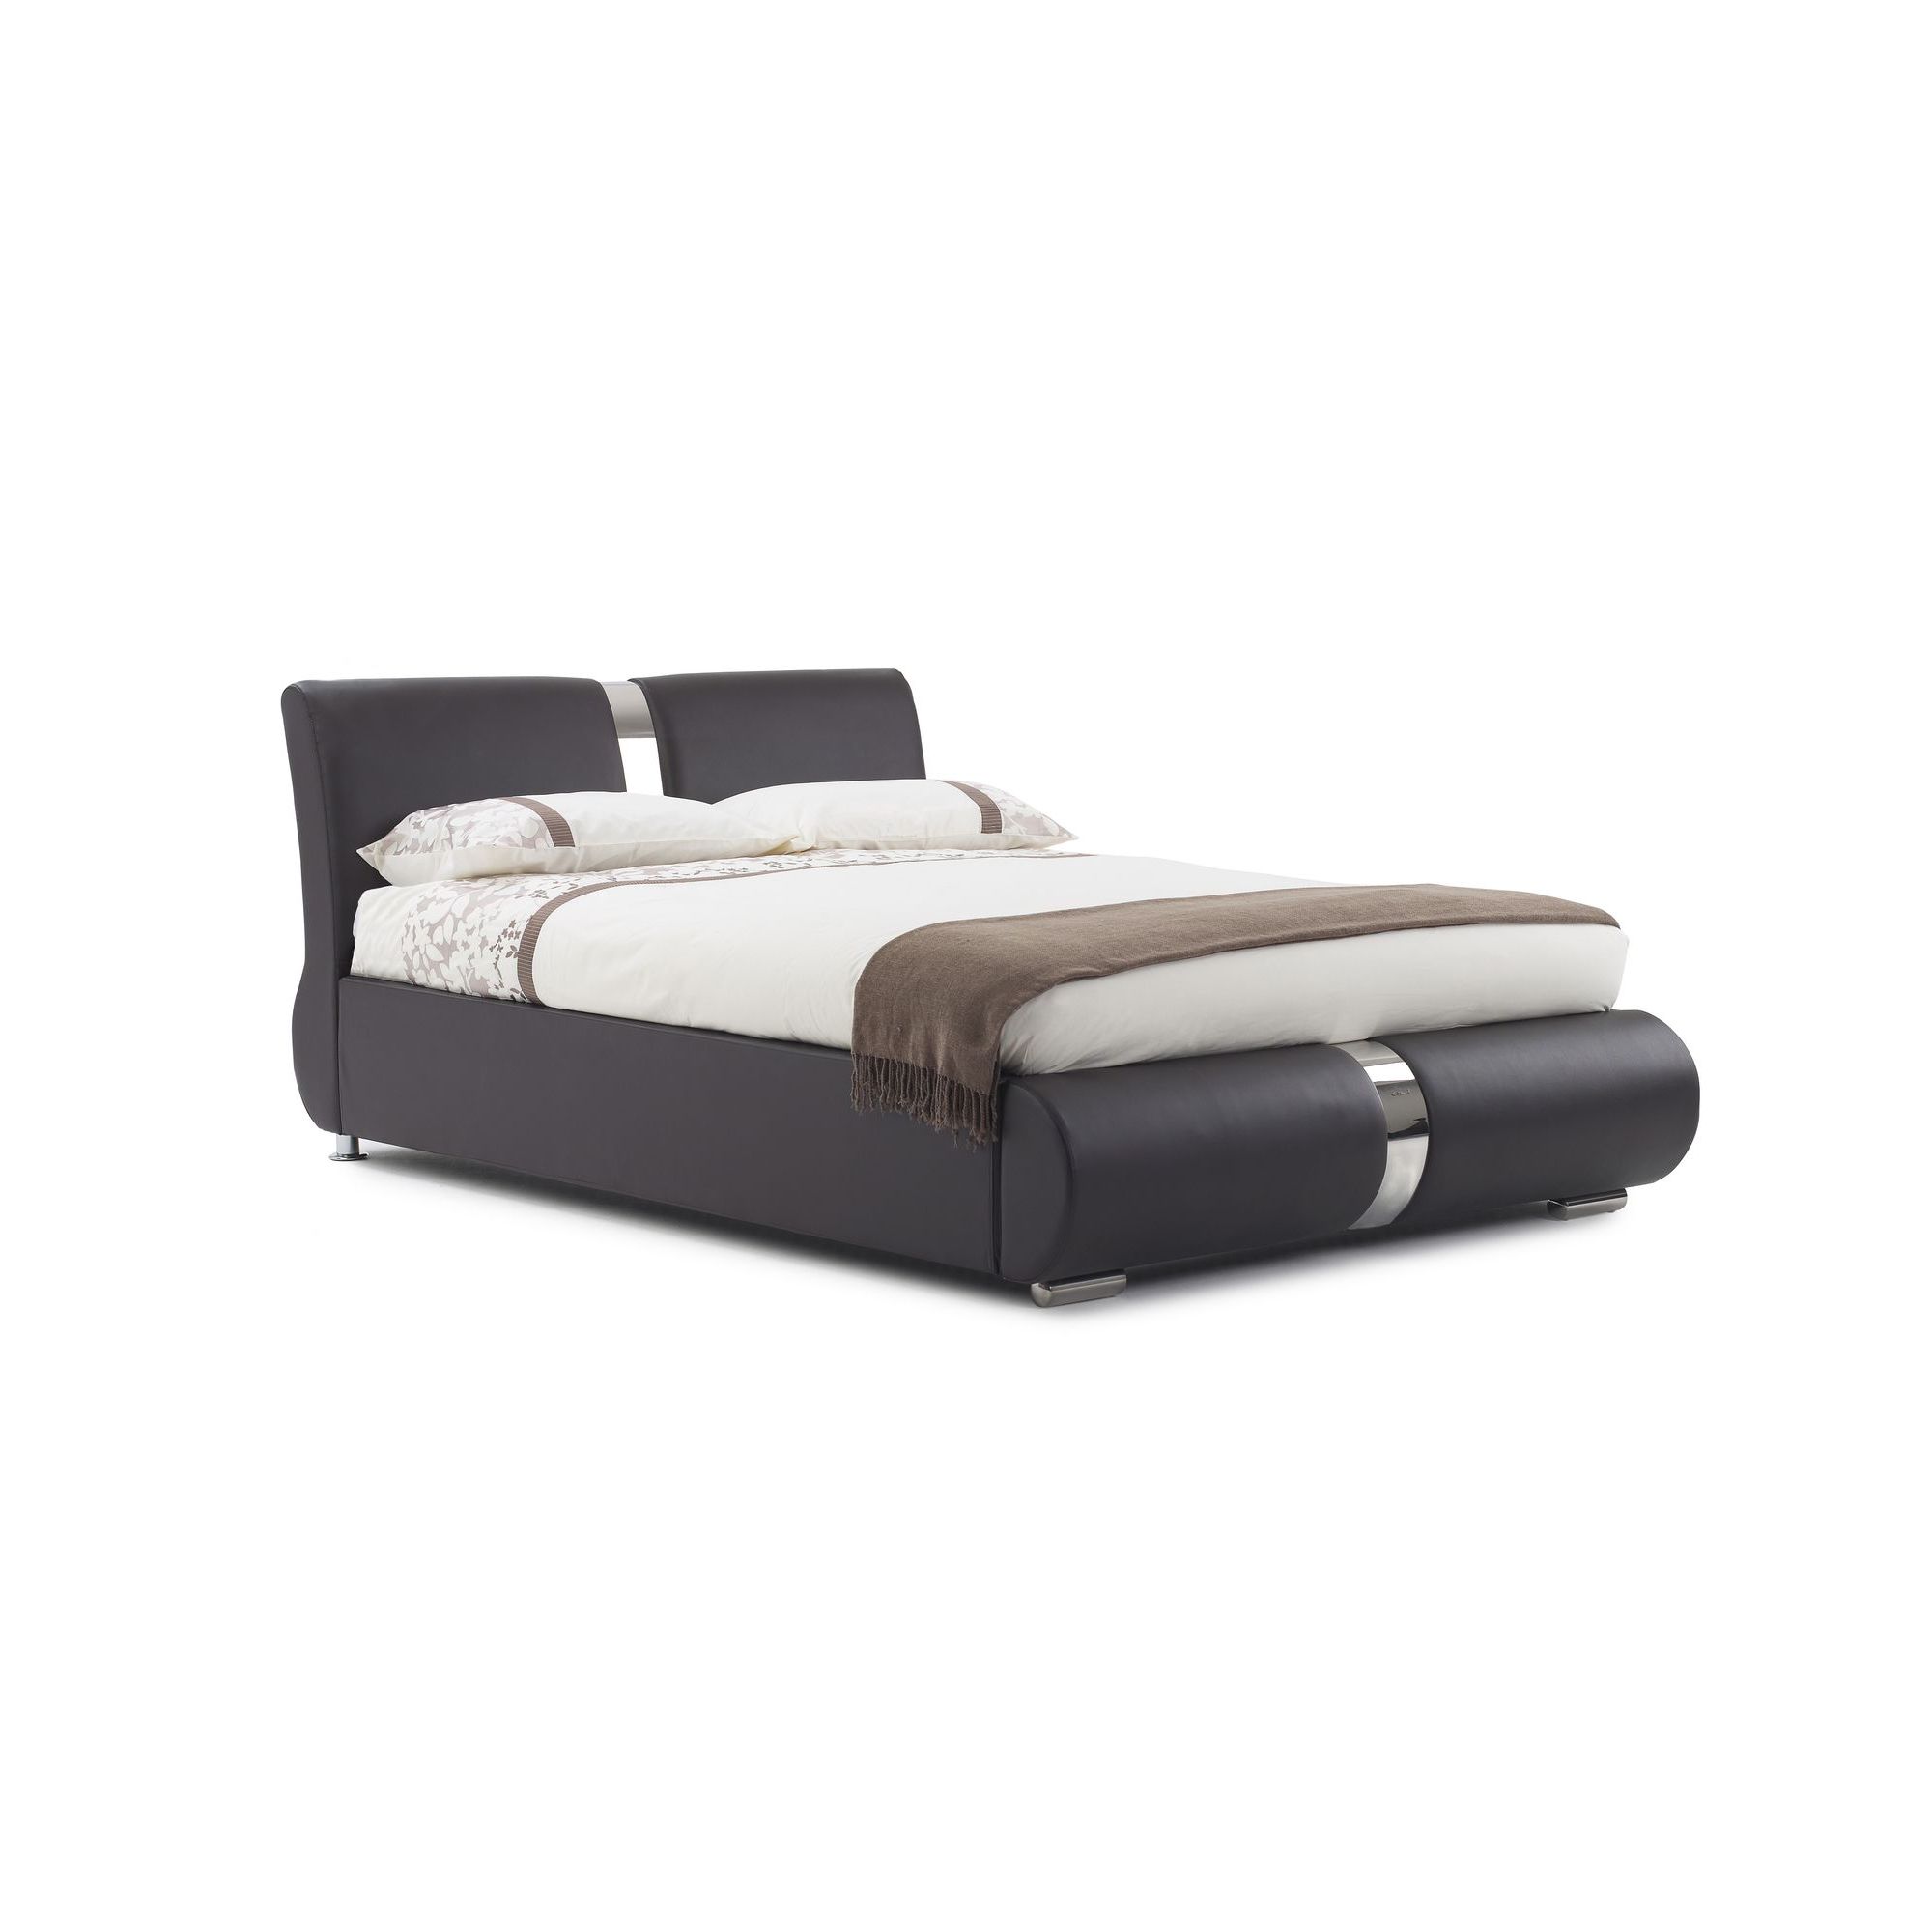 Frank Bosworth Milan Leather Bed - King - Brown at Tesco Direct